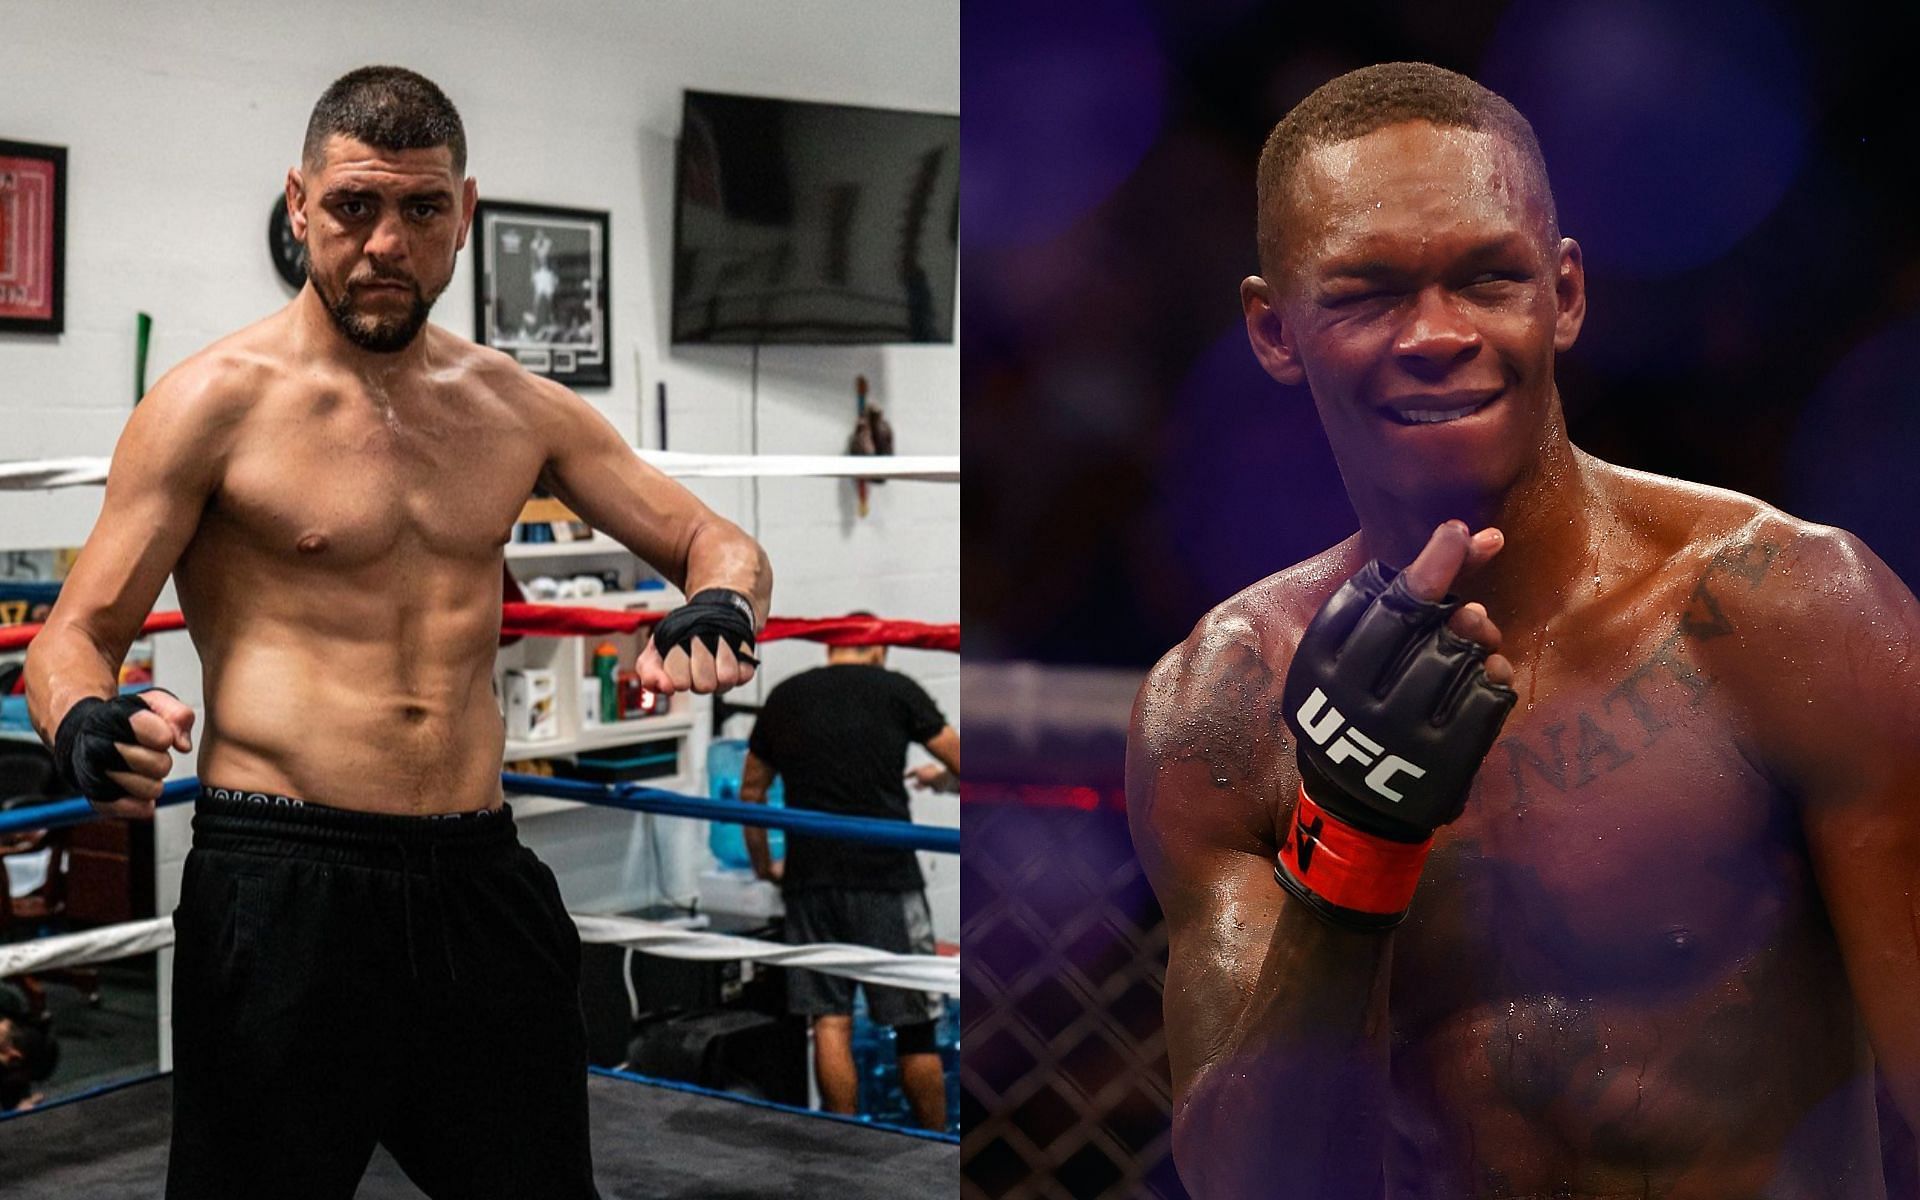 Nick Diaz (left) Israel Adesanya (right) [Image Courtesy: @nickdiaz209 on Instagram and Getty Images]